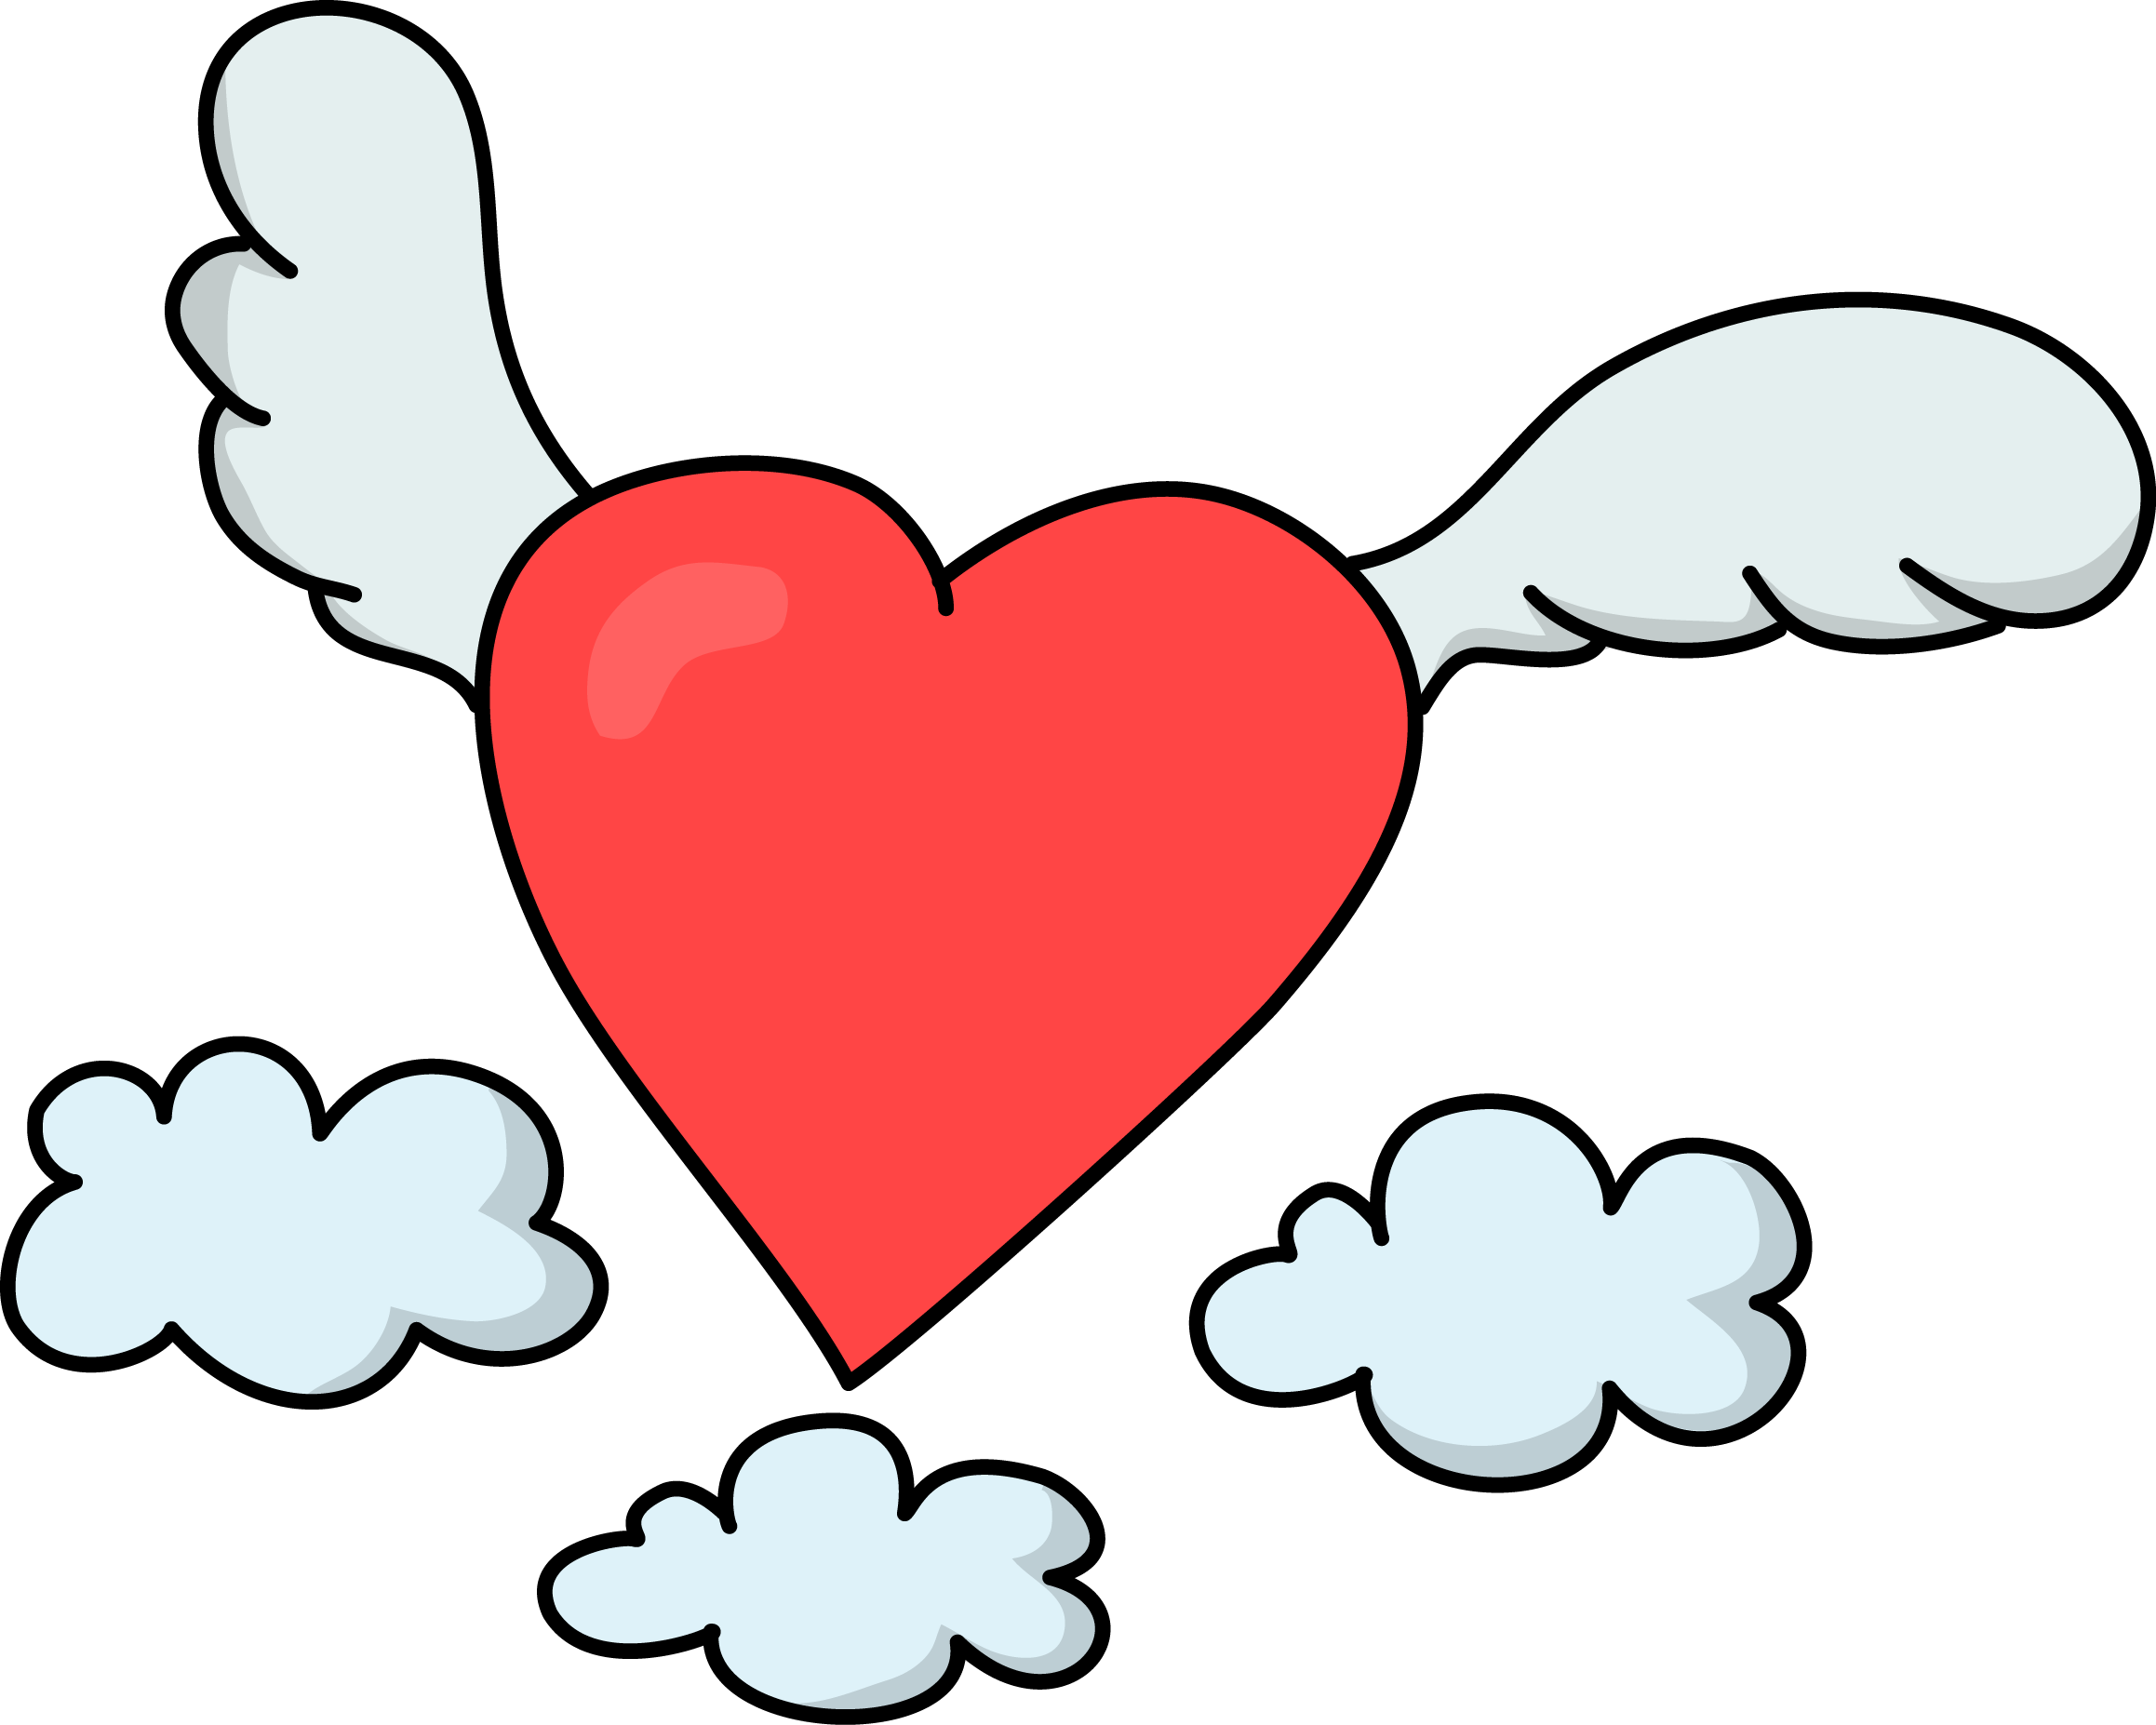 free heart clipart high resolution - photo #21